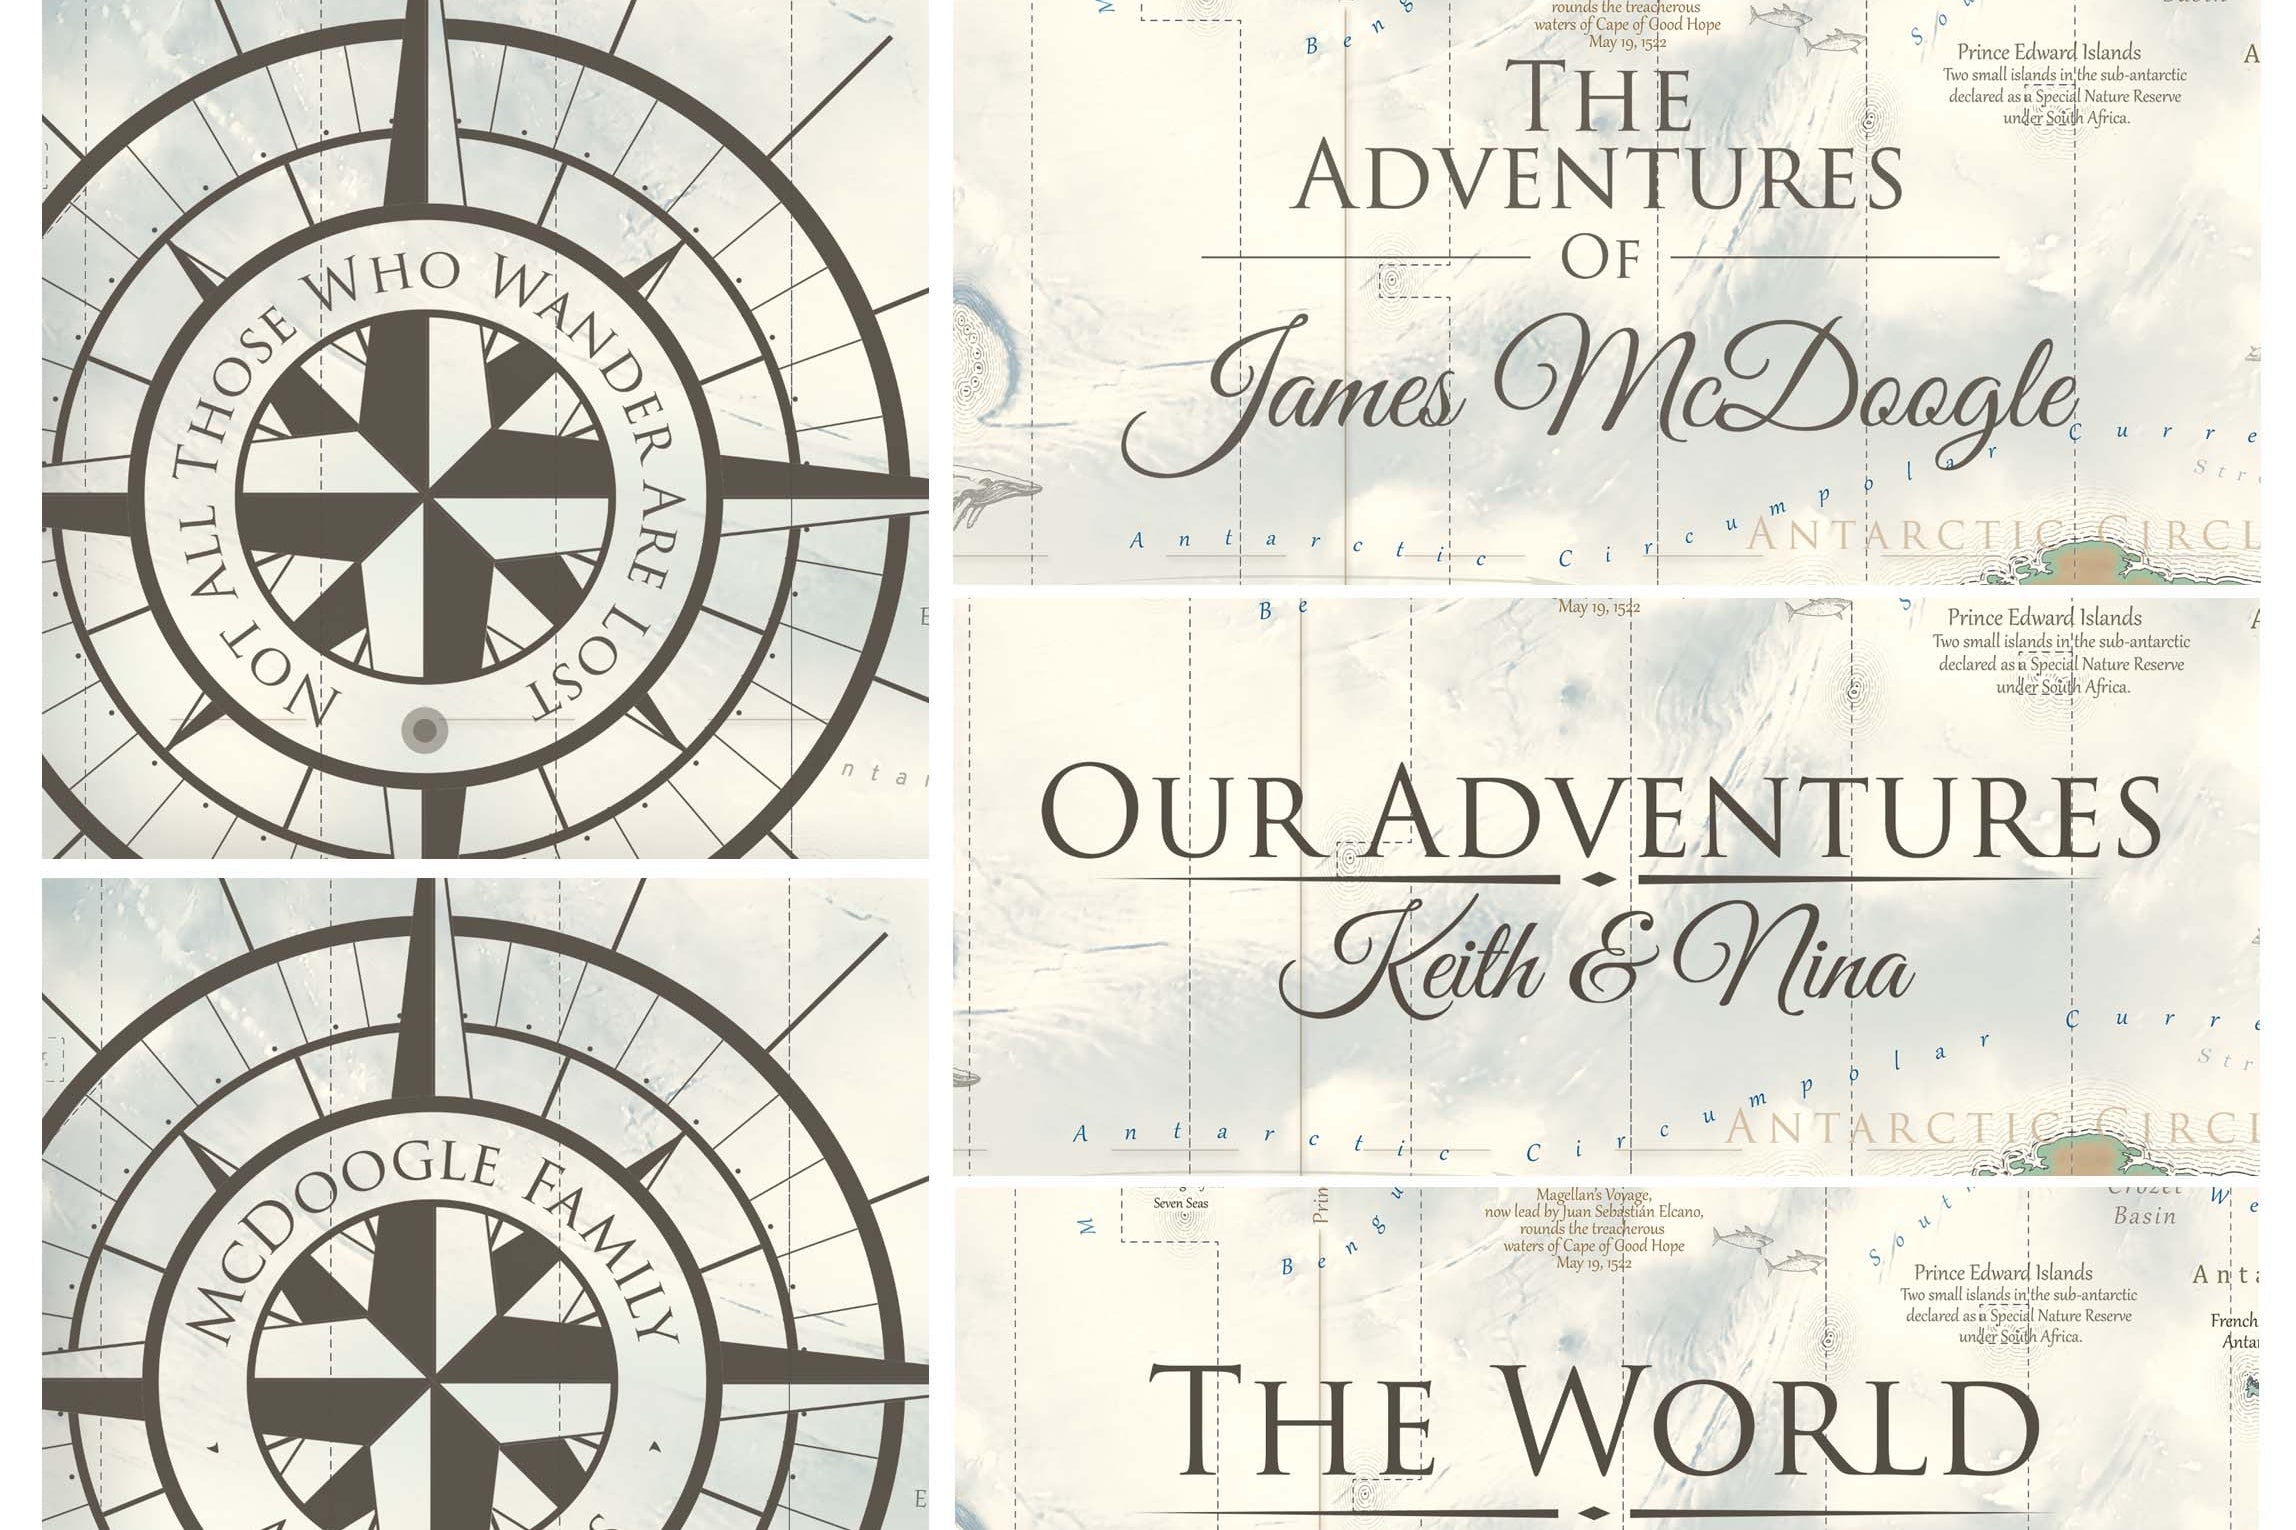 Personalization options for your custom gold world map. Compass, titles, and legends with family or business names